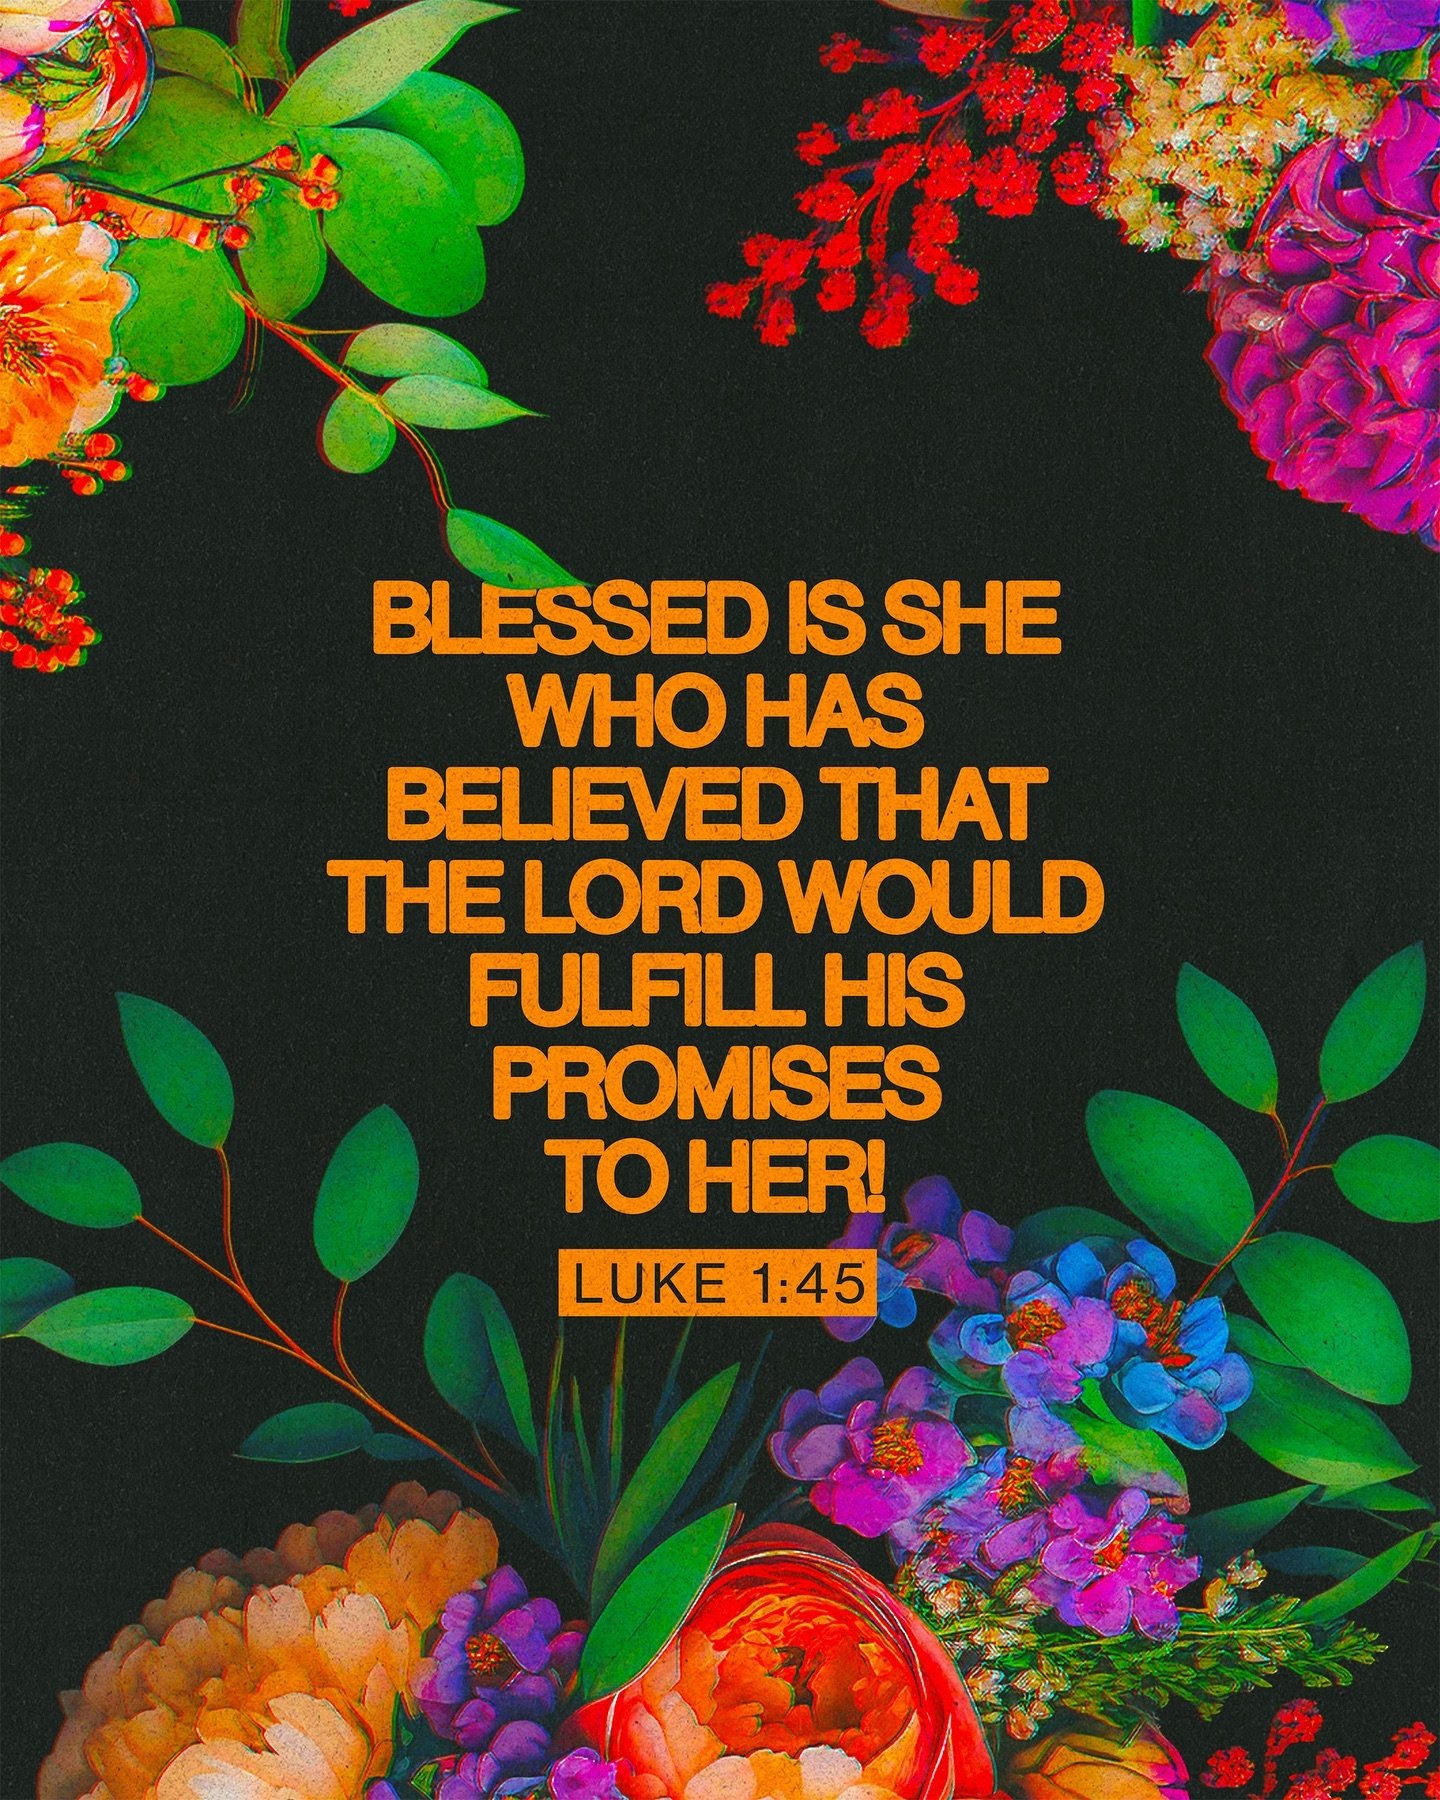 Luke 1:45 is a familiar verse that emphasizes the importance and blessing of faith in God&rsquo;s promises. In this text Mary, the mother of Jesus, is praised for her faith. The verse says, &ldquo;Blessed is she who has BELIEVED that the Lord would f